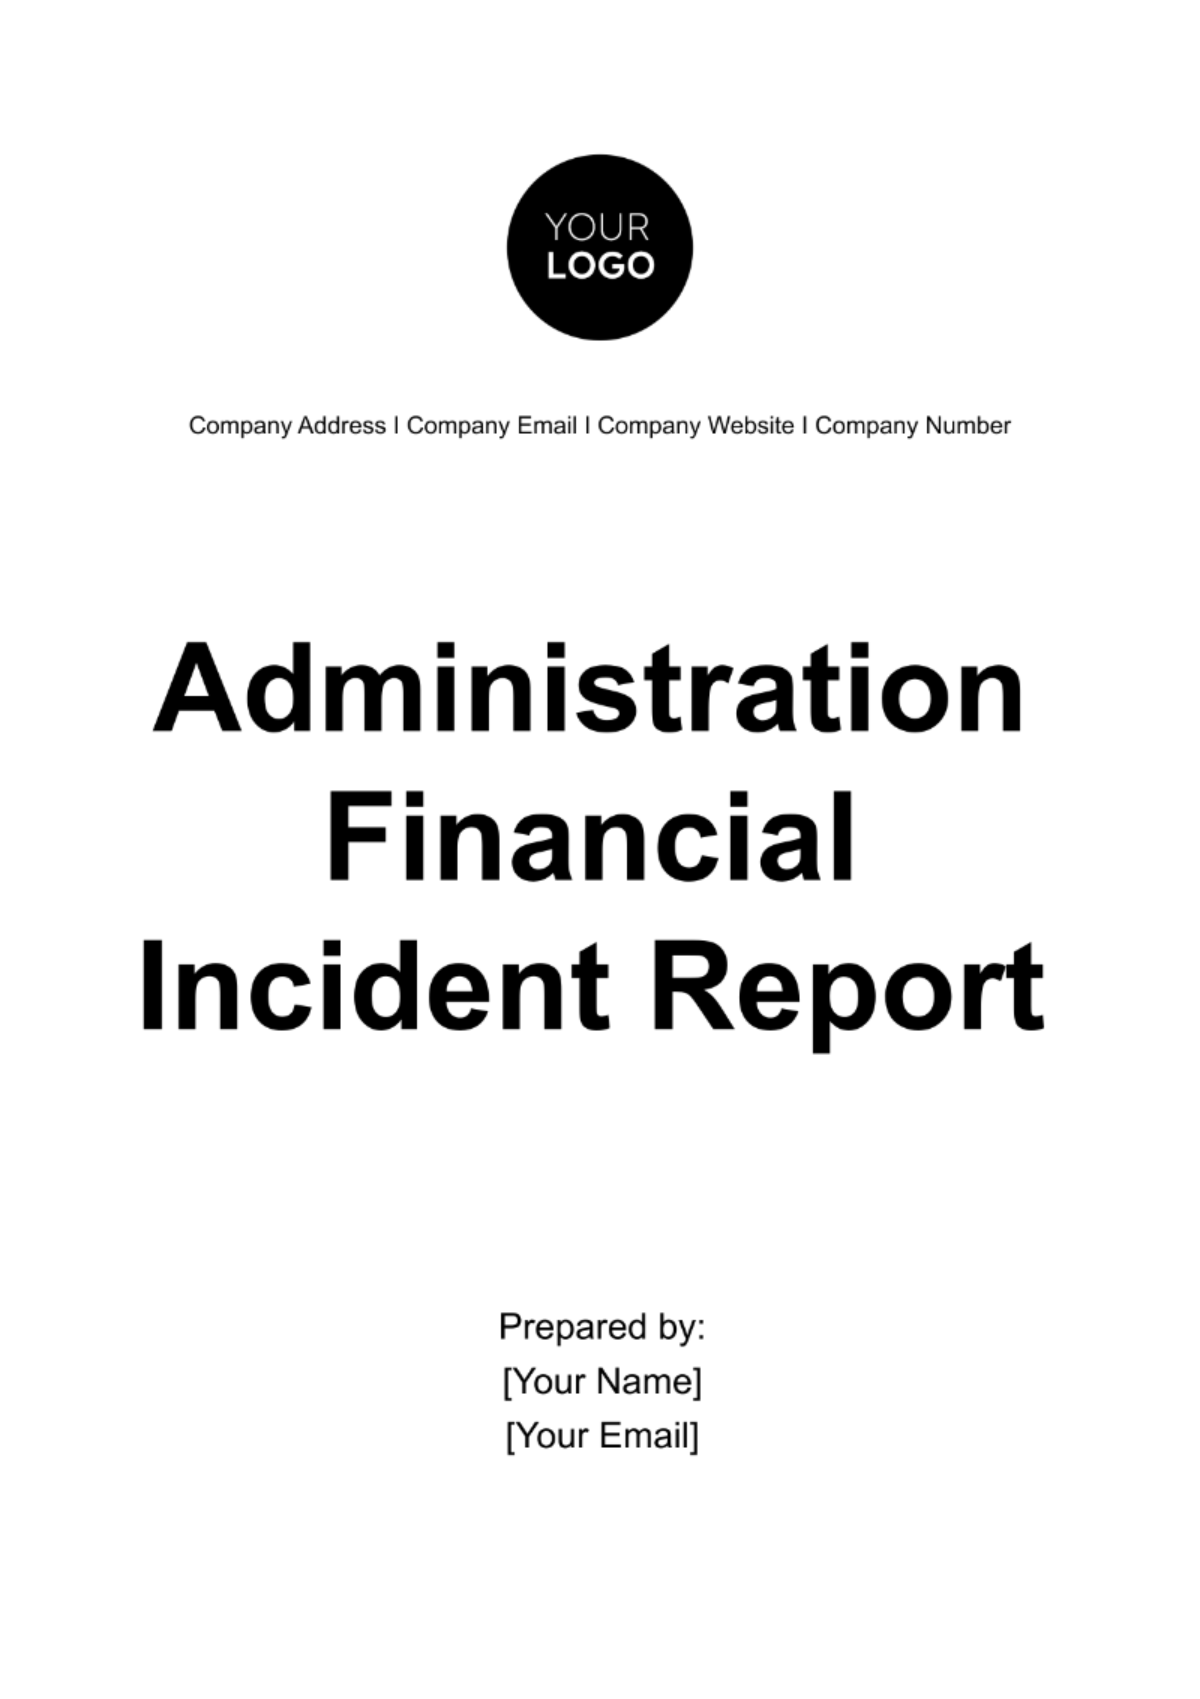 Free Administration Financial Incident Report Template